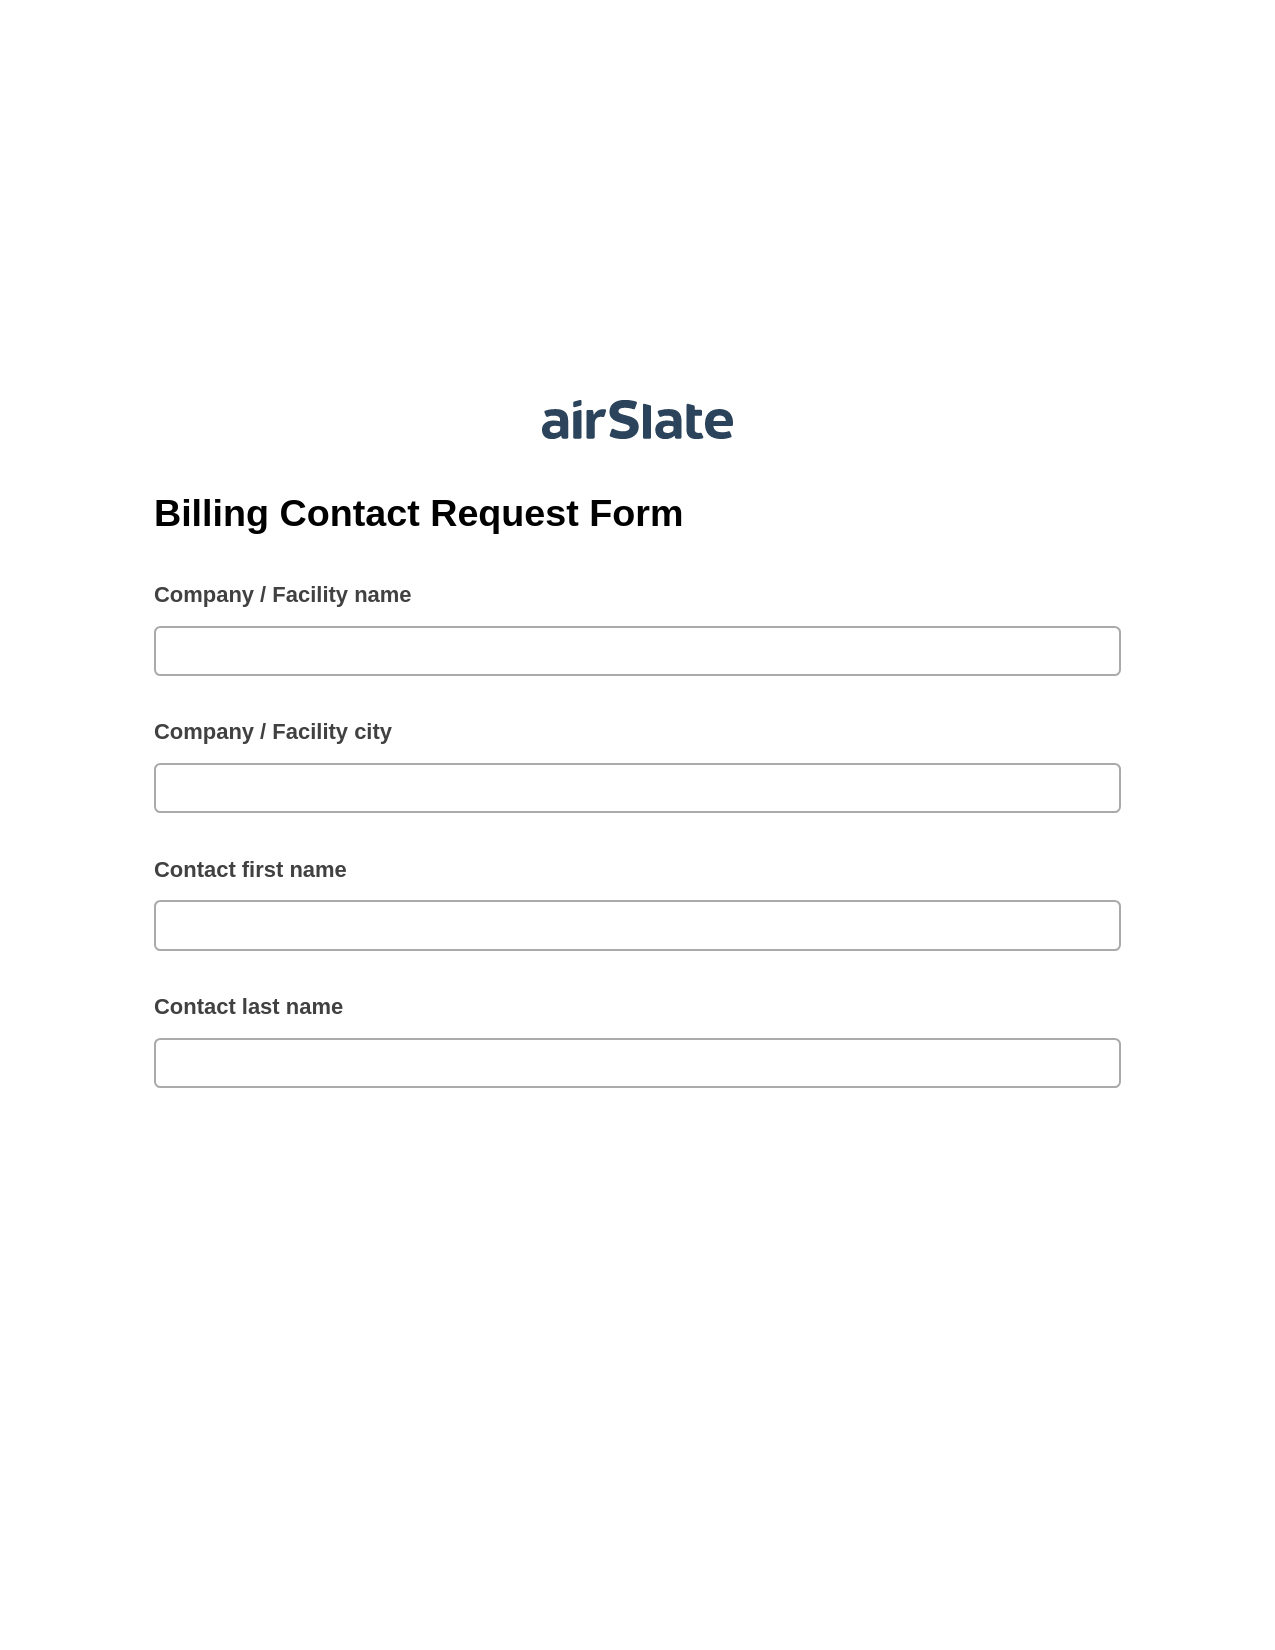 Multirole Billing Contact Request Form Pre-fill Dropdowns from CSV File Bot, Update Salesforce Record Bot, Export to NetSuite Record Bot